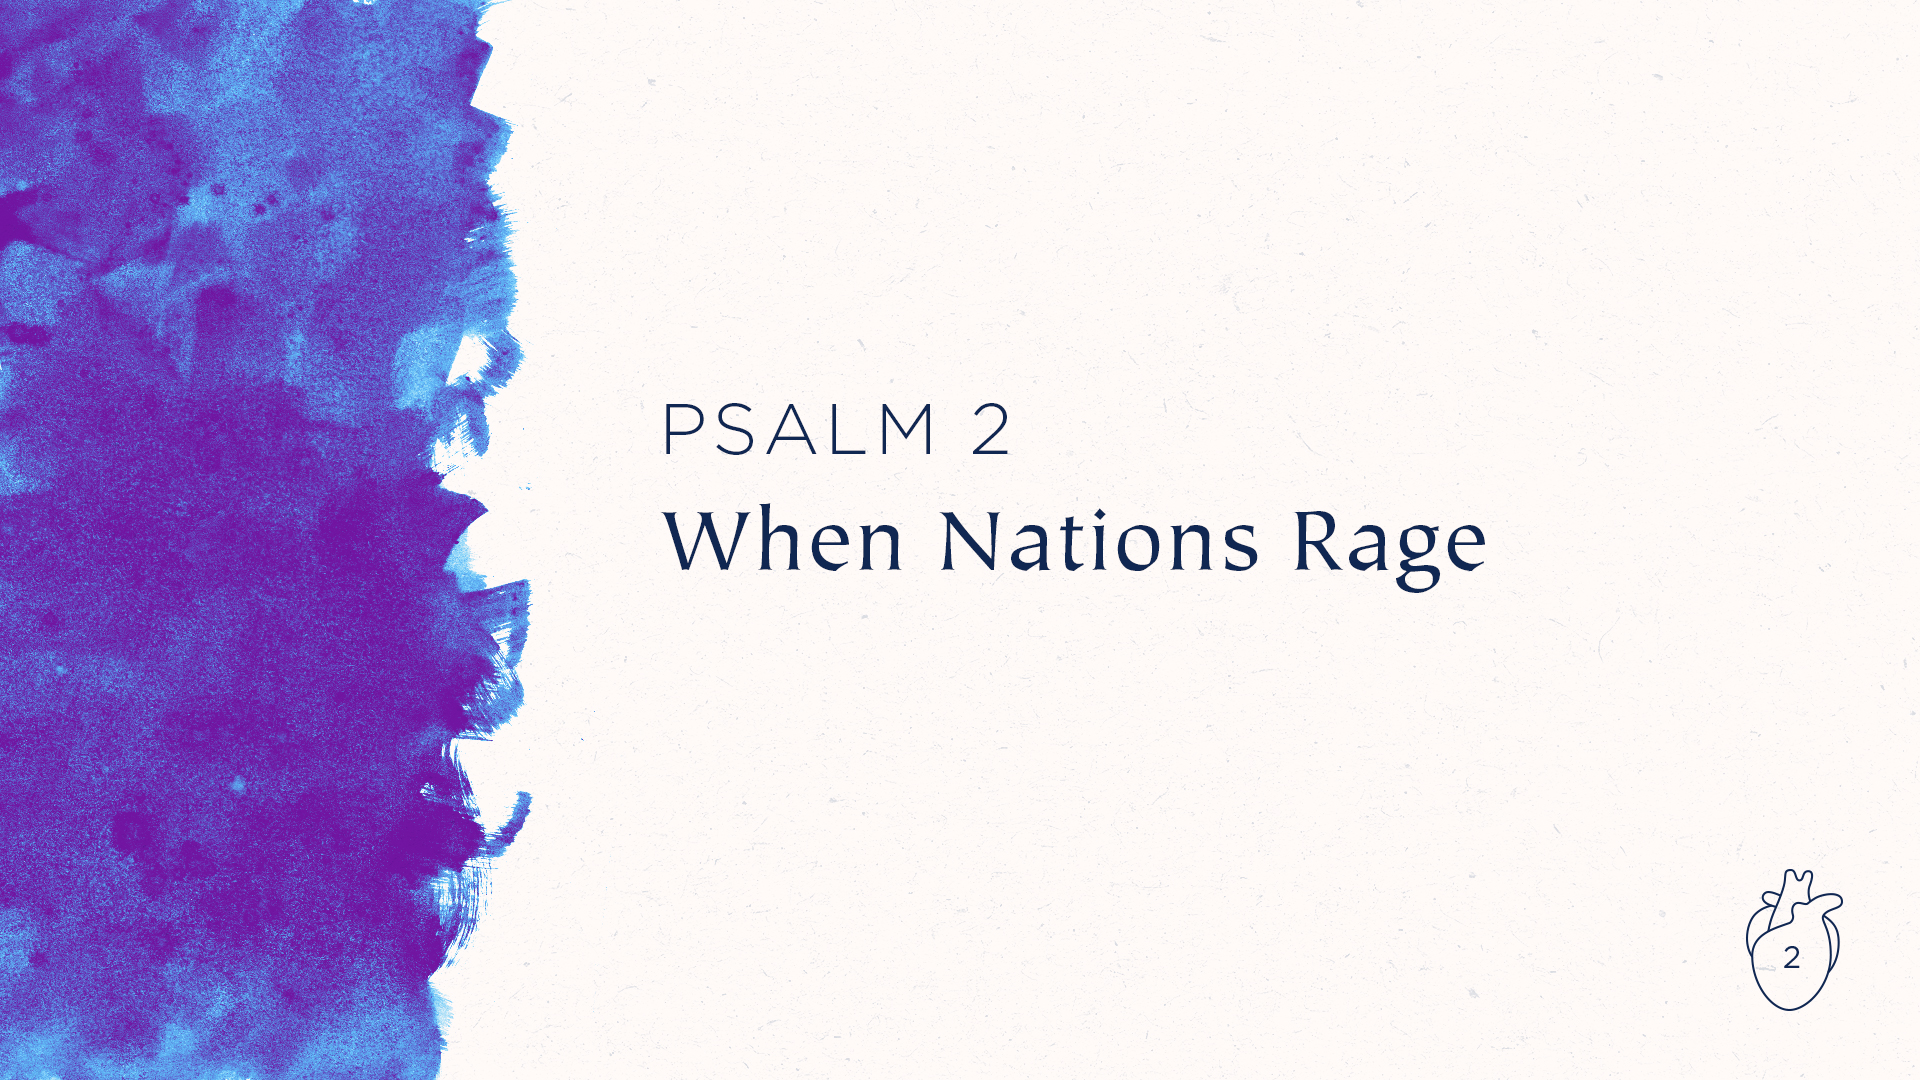 When Nations Rage